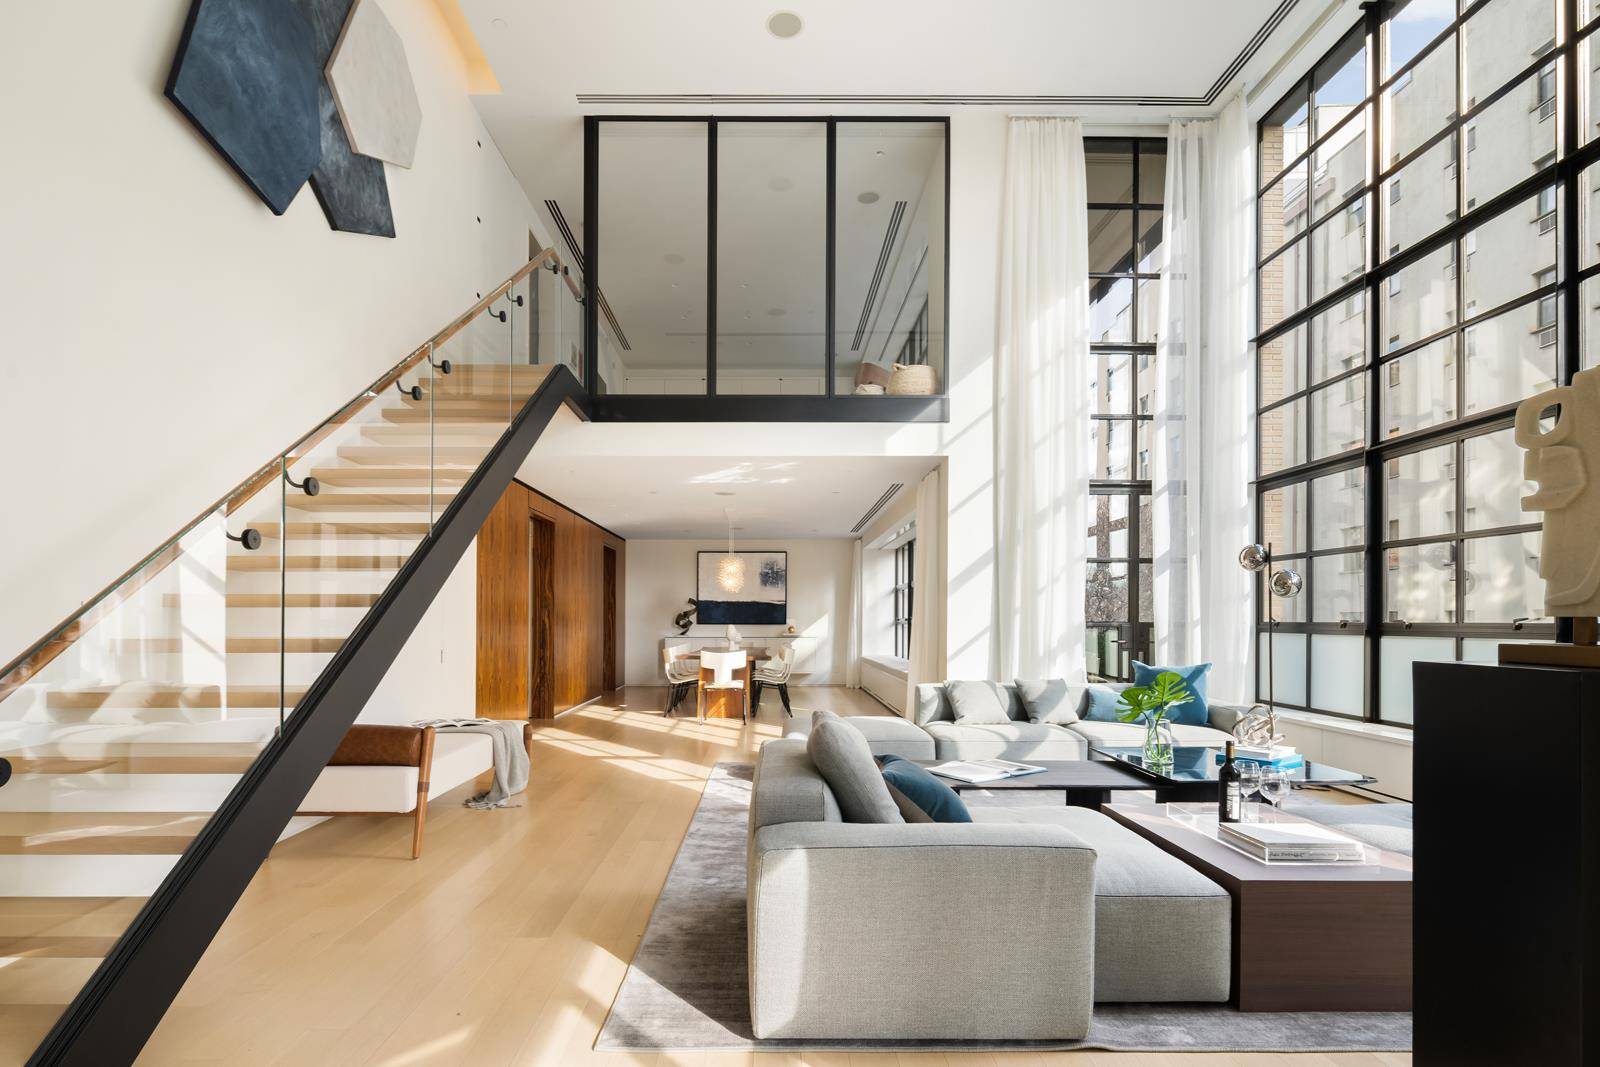 PRIME WEST VILLAGE FULLY RENOVATED DUPLEX WITH TWO LOGGIA TERRACES Rarely does a property of this scale and caliber become available in the West Village in a prime location and ...